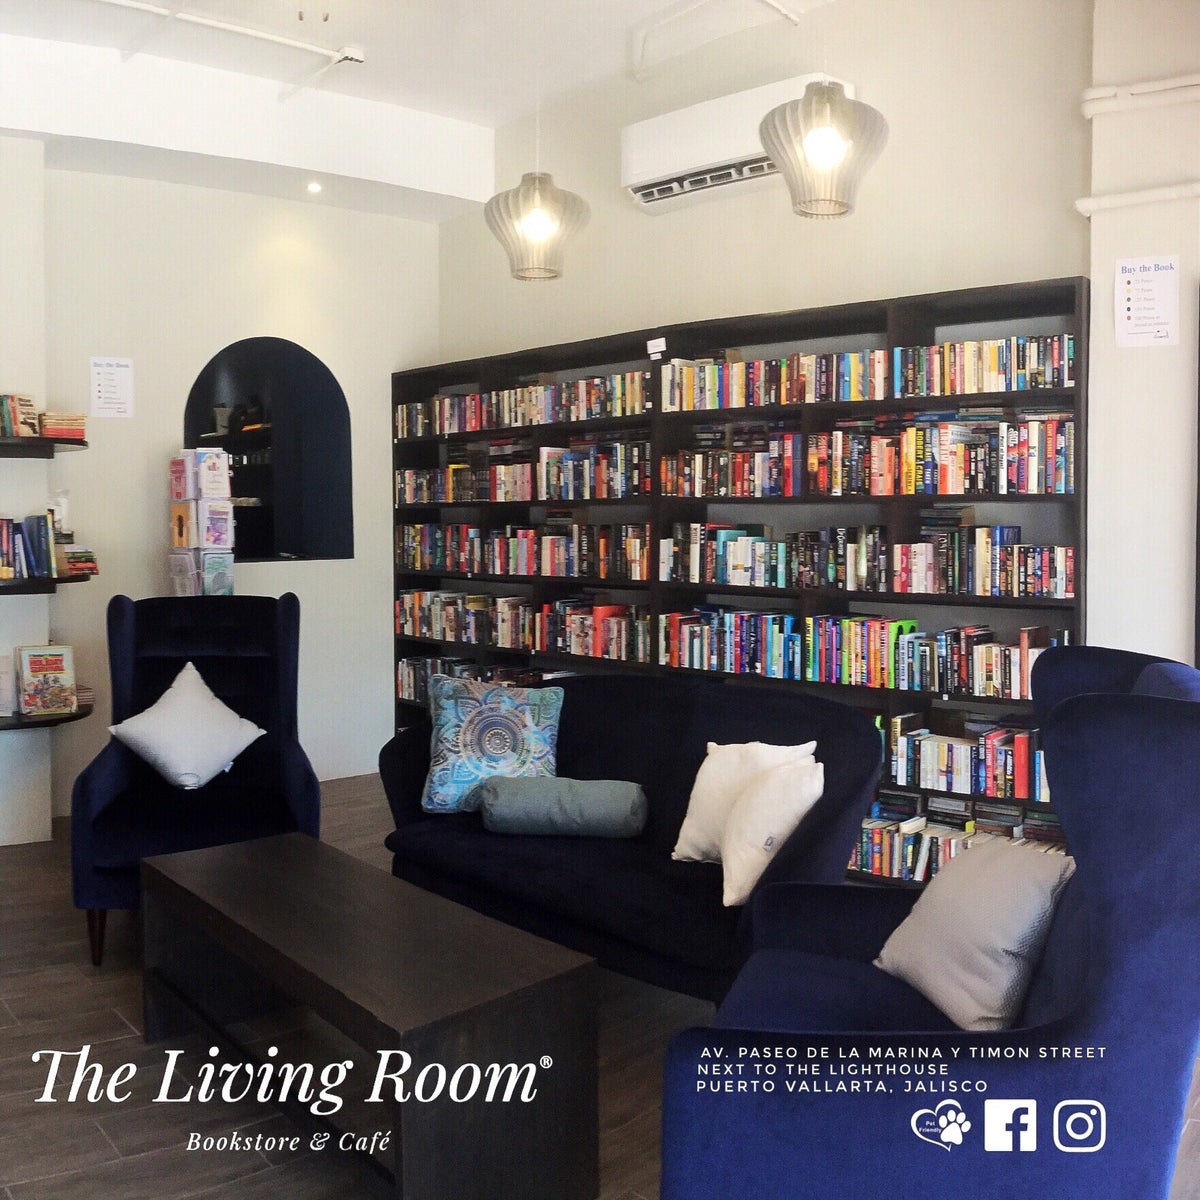 The Living Room Bookstore